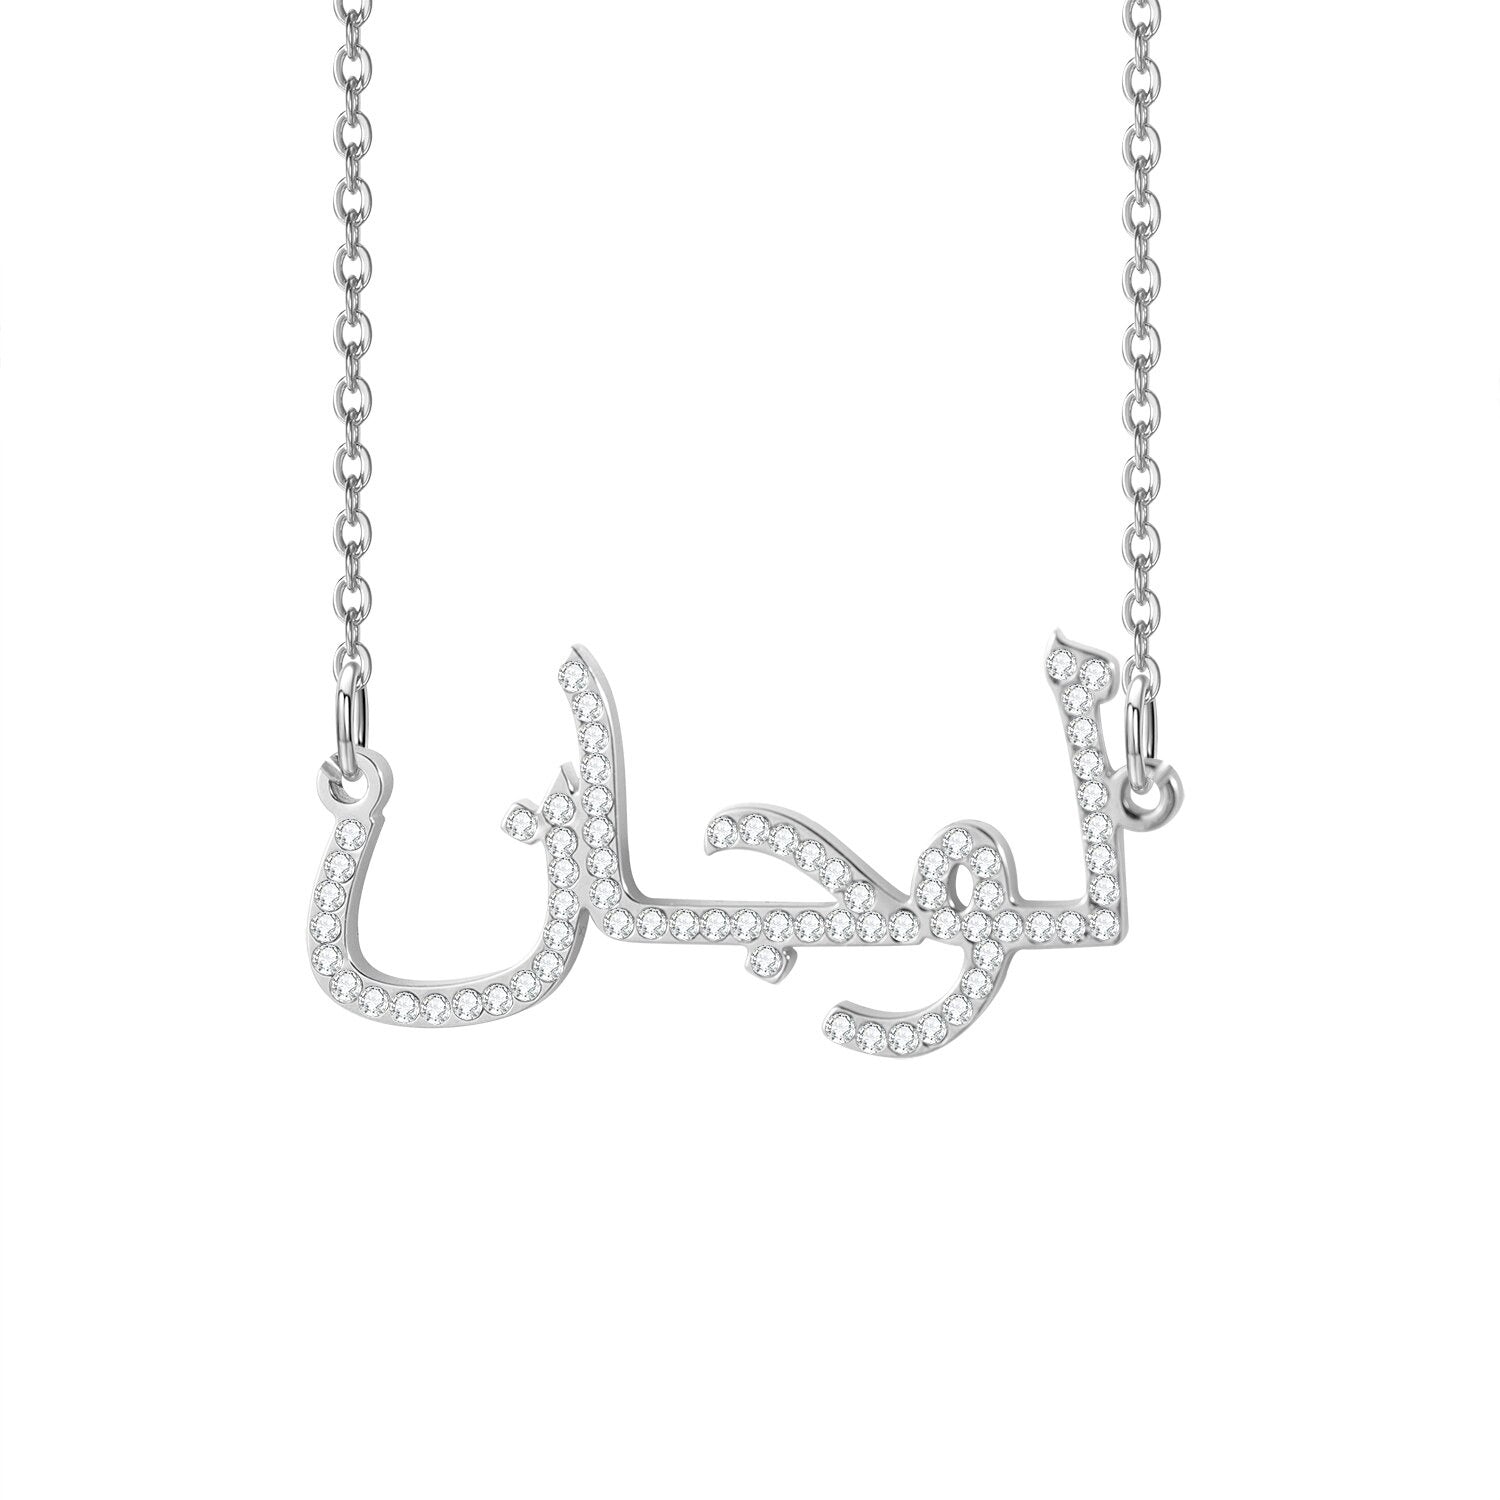 Arabic Name Necklace with Crystals silver diamonds